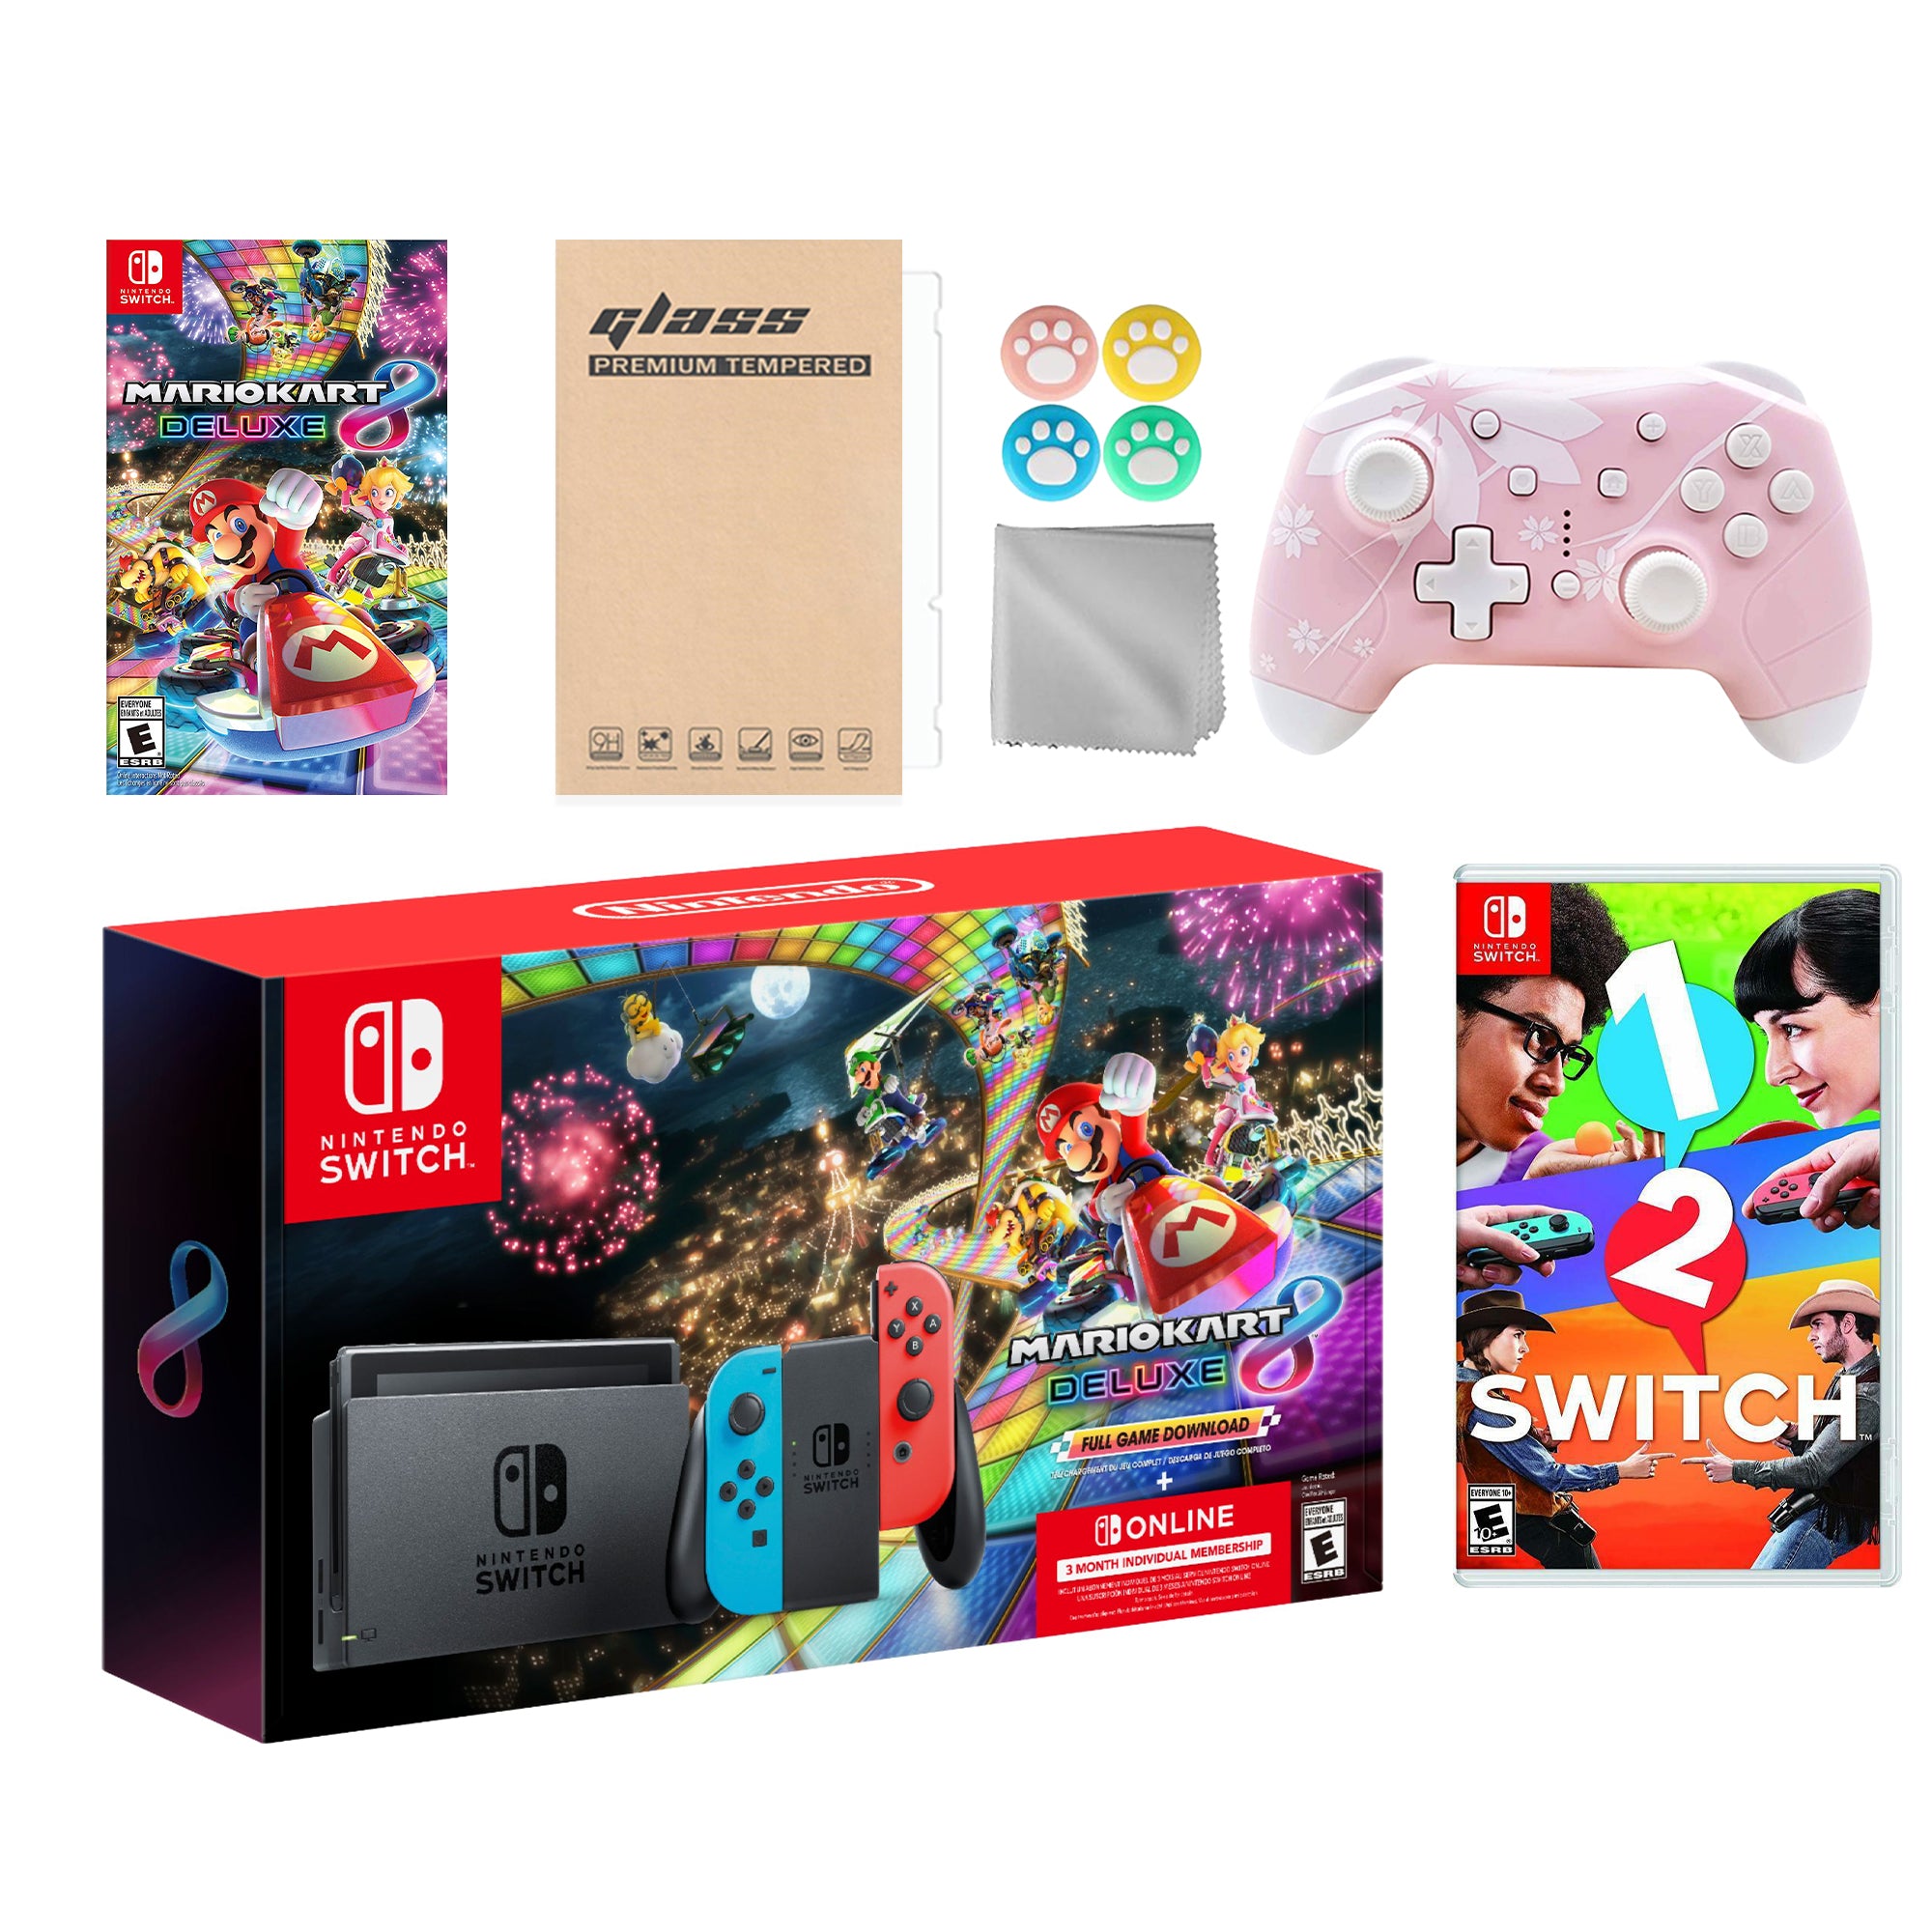 Nintendo Switch Mario Kart 8 Deluxe Bundle: Red Blue Console, Mario Kart 8 & Membership, 1-2 Switch, Mytrix Wireless Pro Controller Pink Cherry Blossom and Accessories